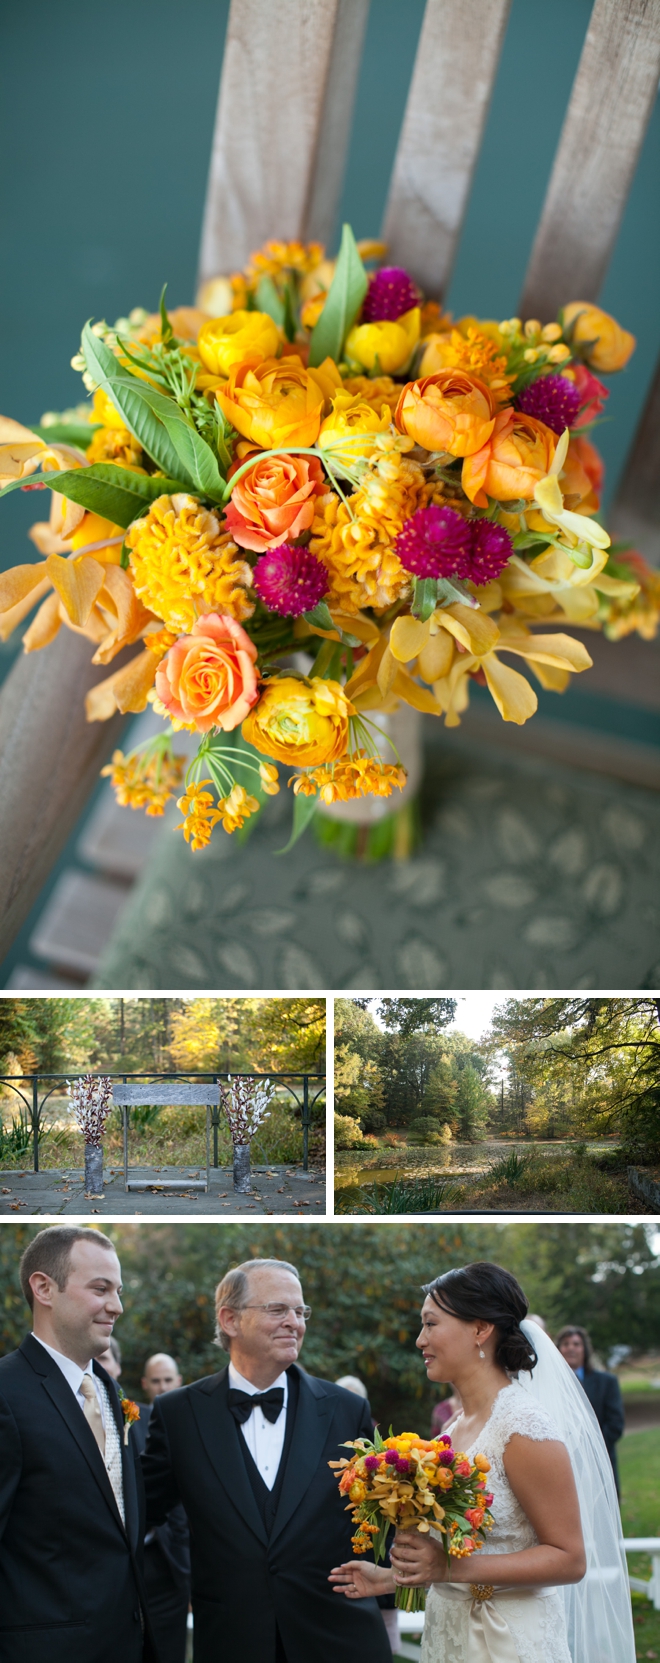 An intimate, rustic fall wedding in Greenwich by Abbey Domond Photography || see more on blog.nearlynewlywed.com